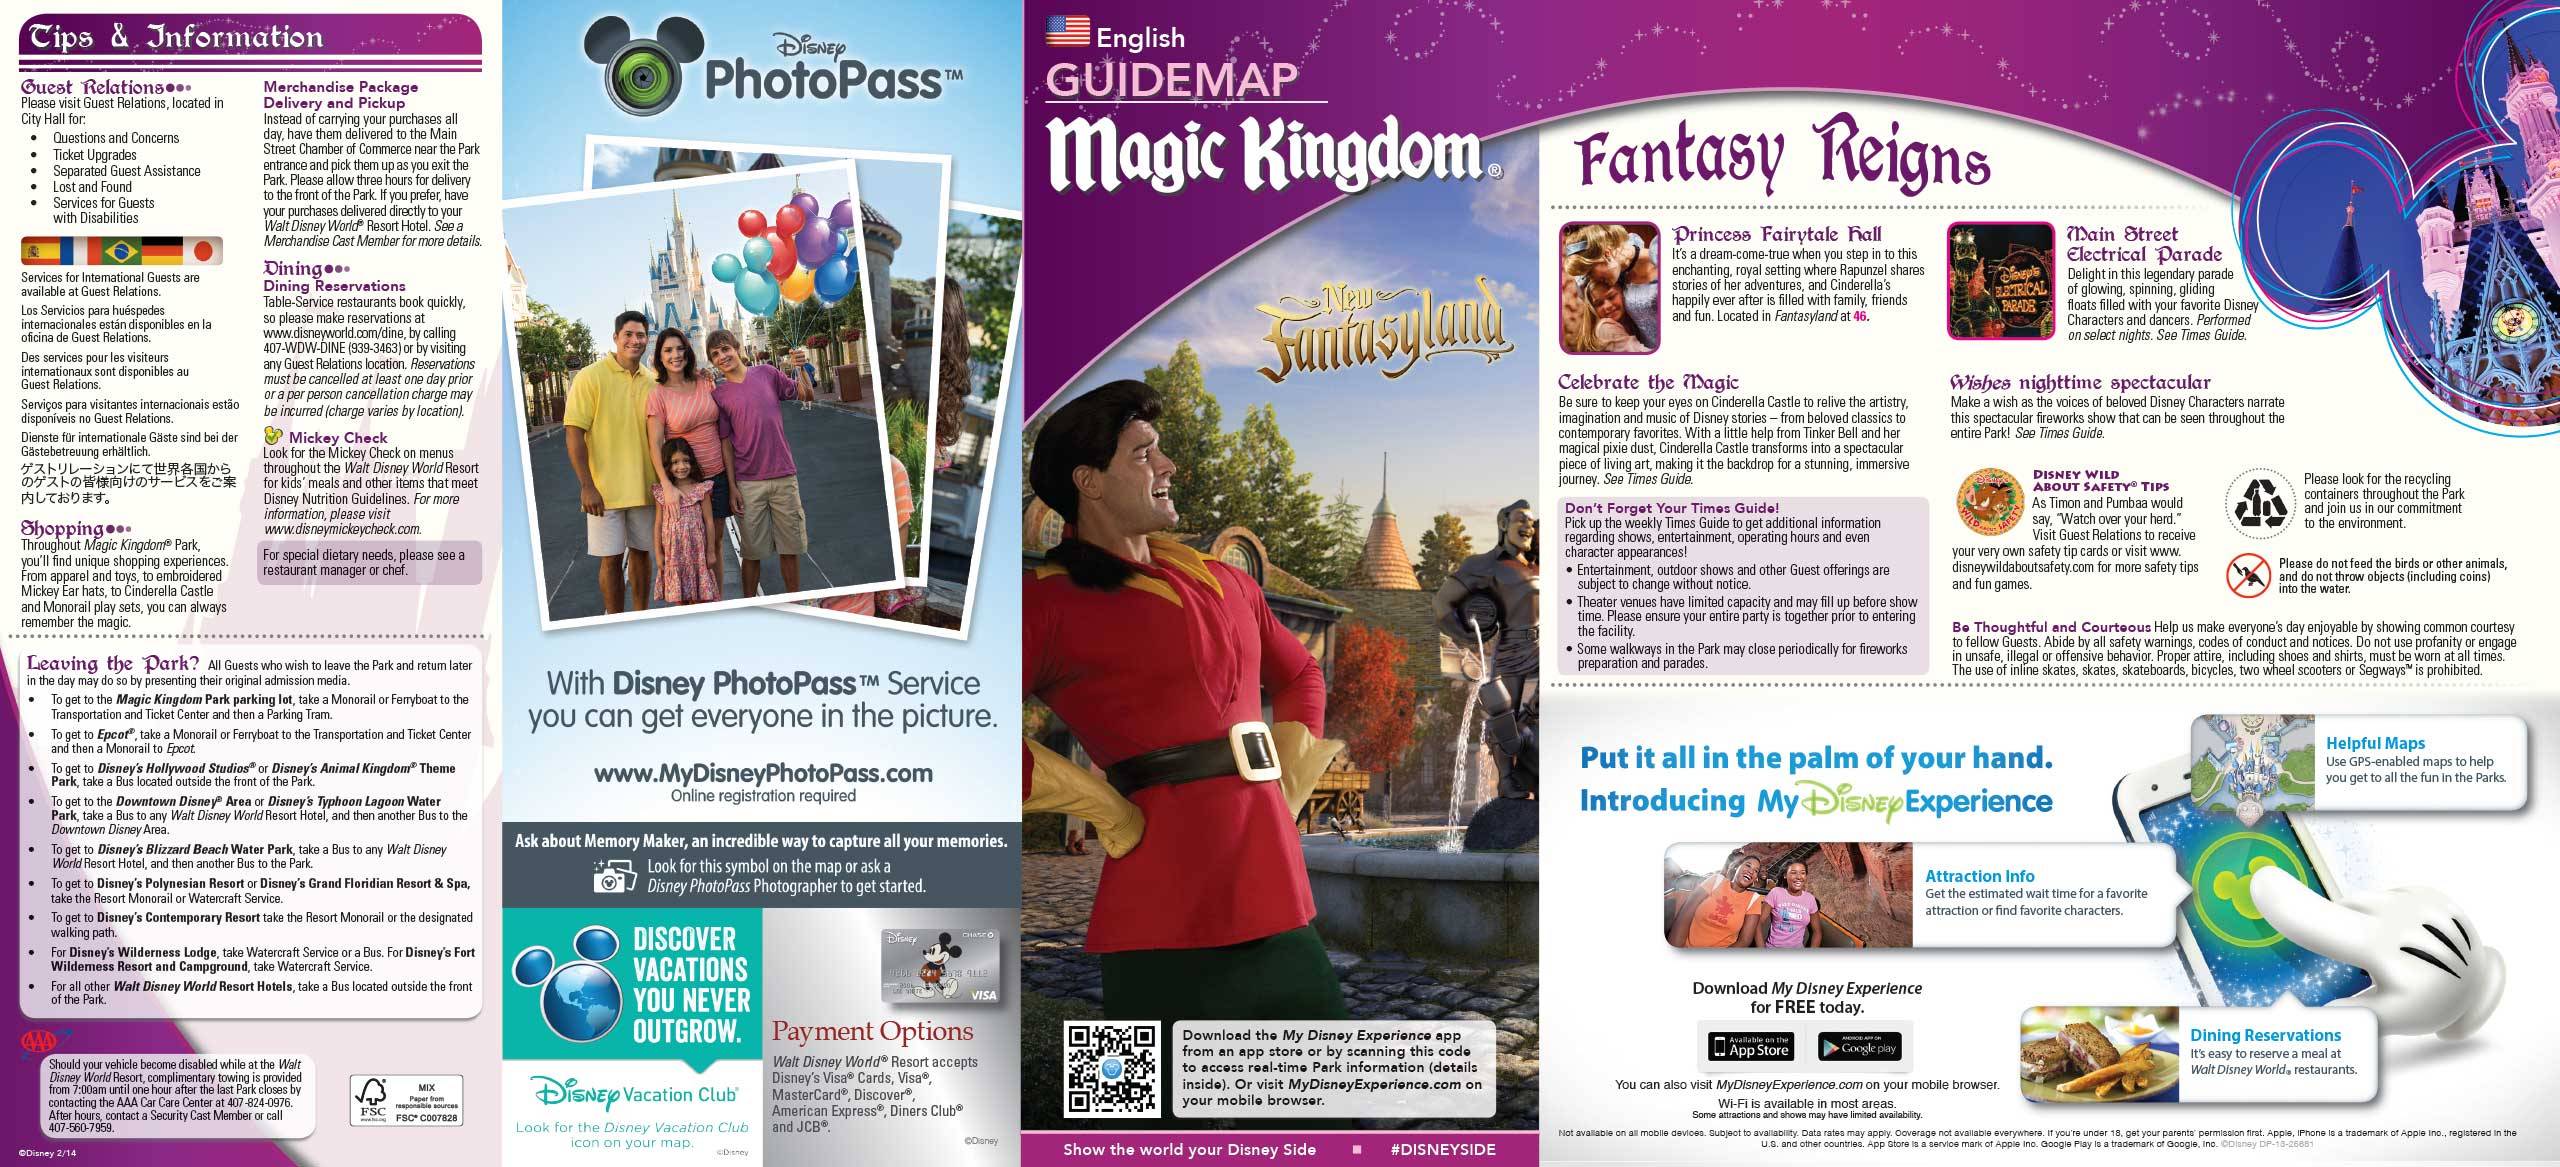 Magic Kingdom guide map with MyMagic+ and FastPass+ details